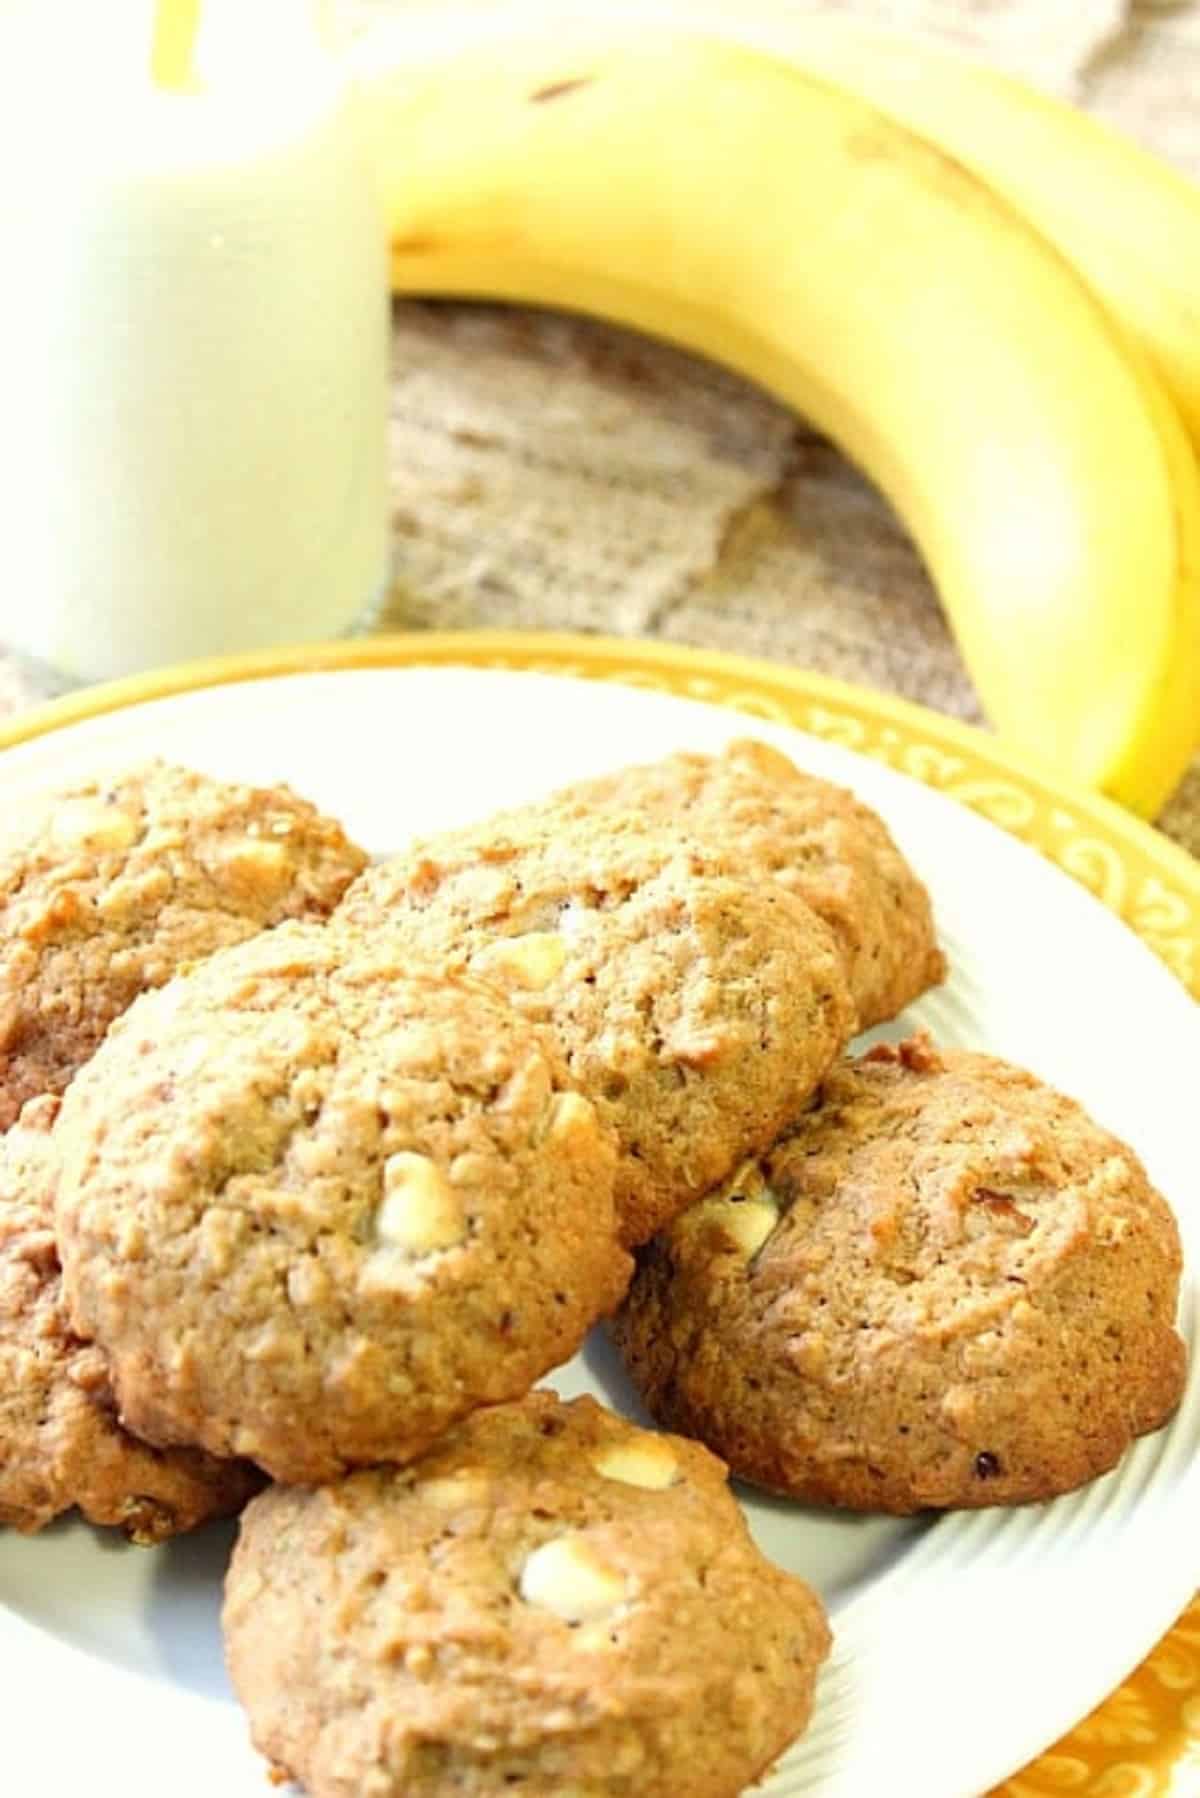 A plate filled with Banana Walnut Cookies and a few ripe bananas in the background.